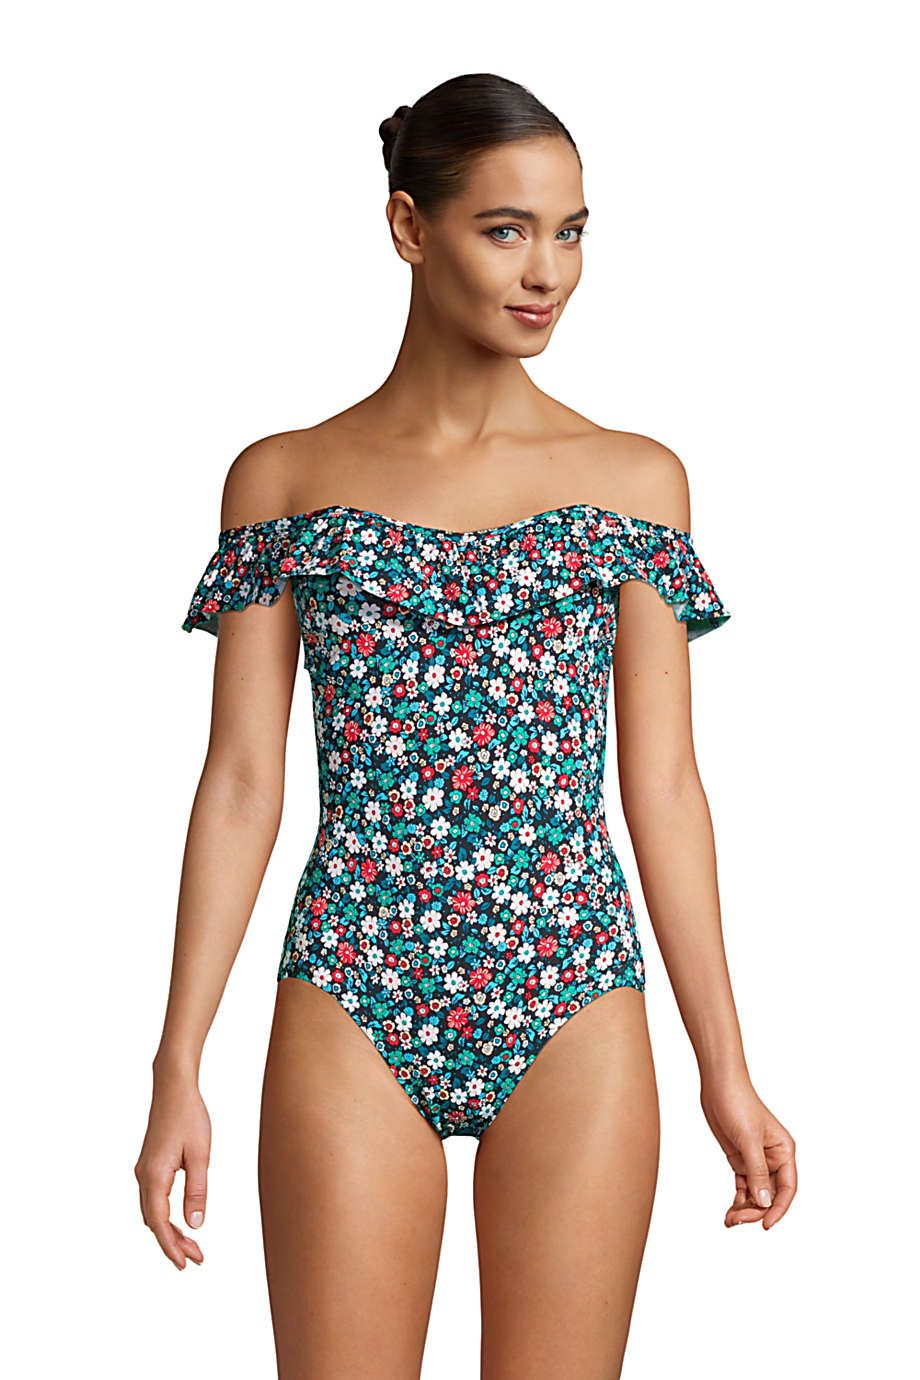 Flattering Off the Shoulder One Piece Swimsuit for Women